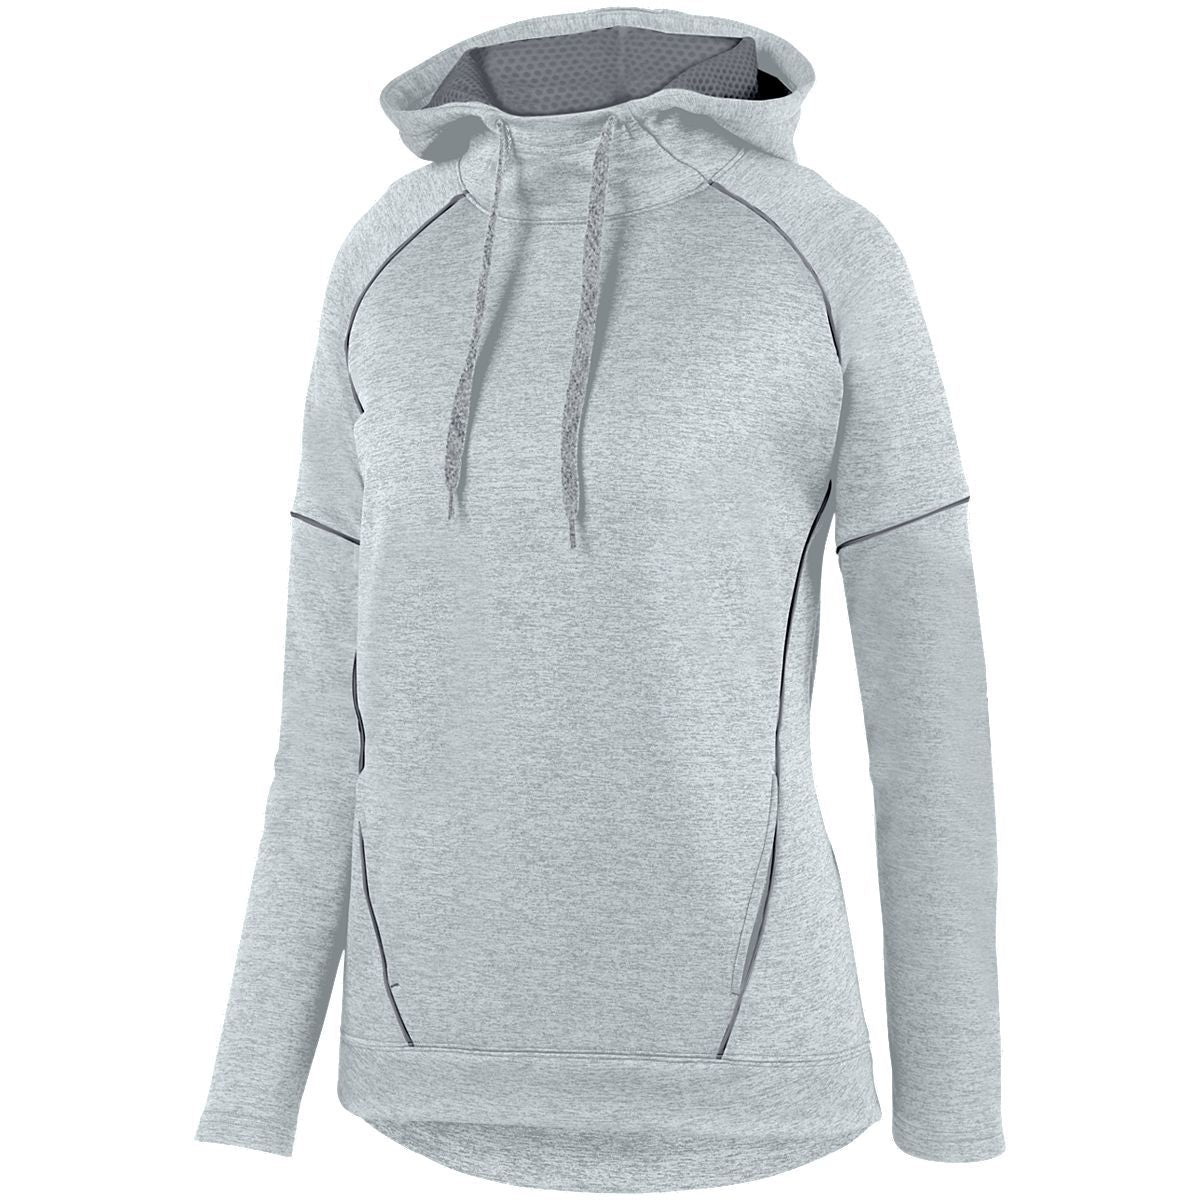 Augusta Sportswear Ladies Zoe Tonal Heather Hoodie in Silver/Graphite  -Part of the Ladies, Augusta-Products, Shirts, Tonal-Fleece-Collection product lines at KanaleyCreations.com